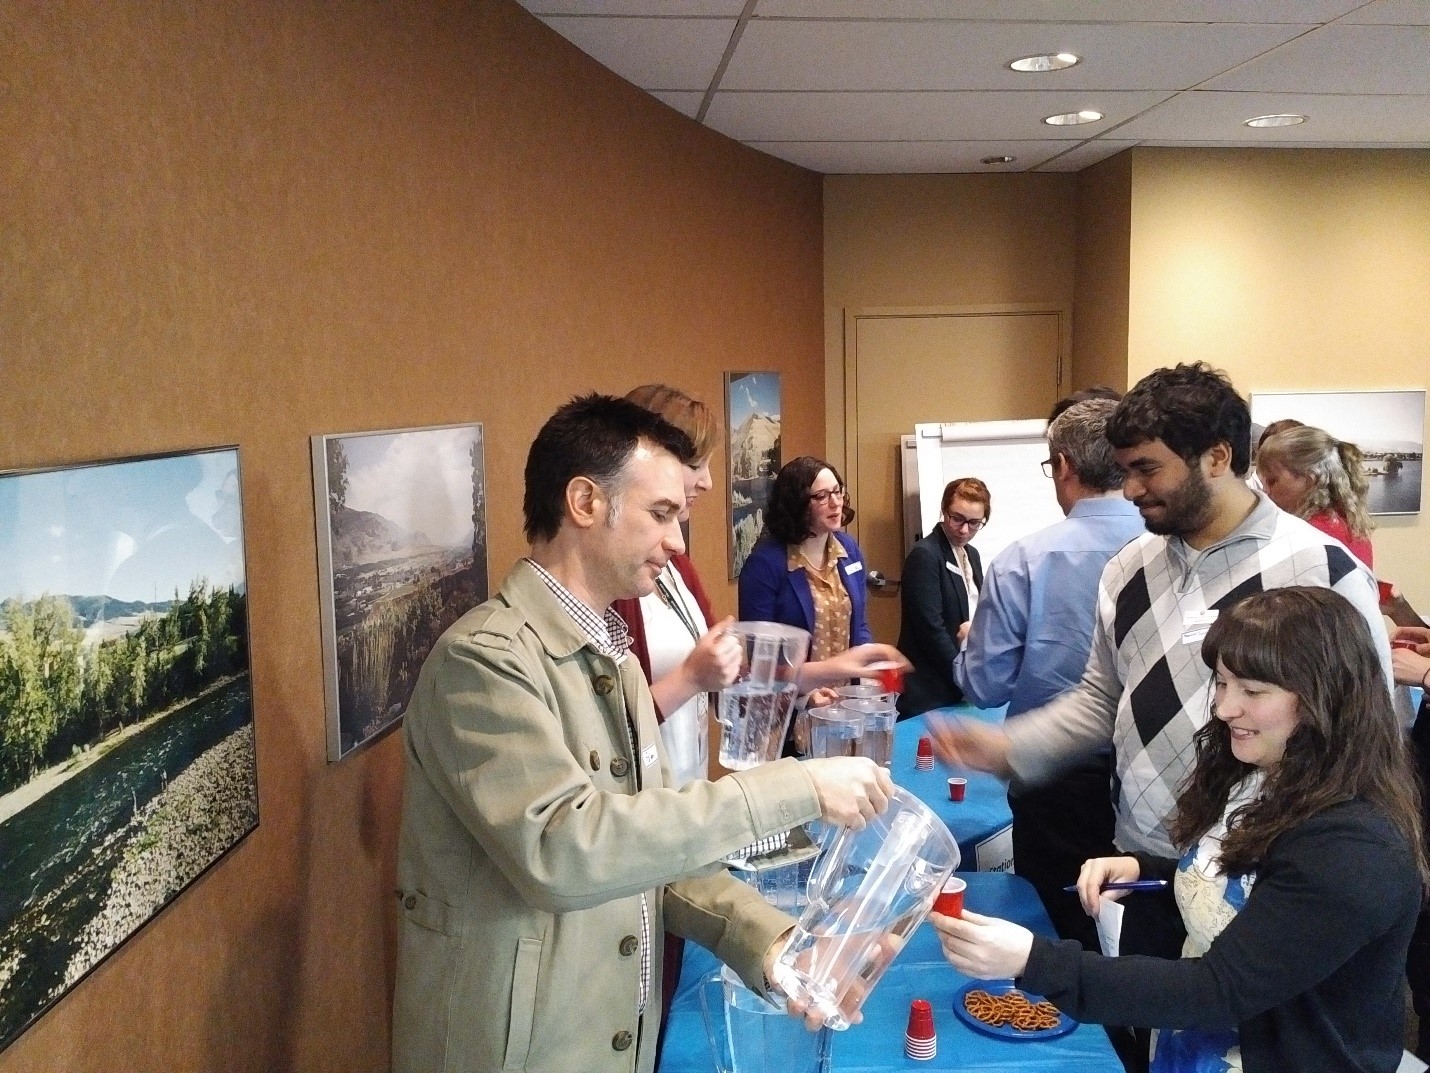 Dr. Glenn Benoy, Canadian Section senior water quality and ecosystem adviser (foreground left), serves up water samples at the tasting event. Credit: IJC files